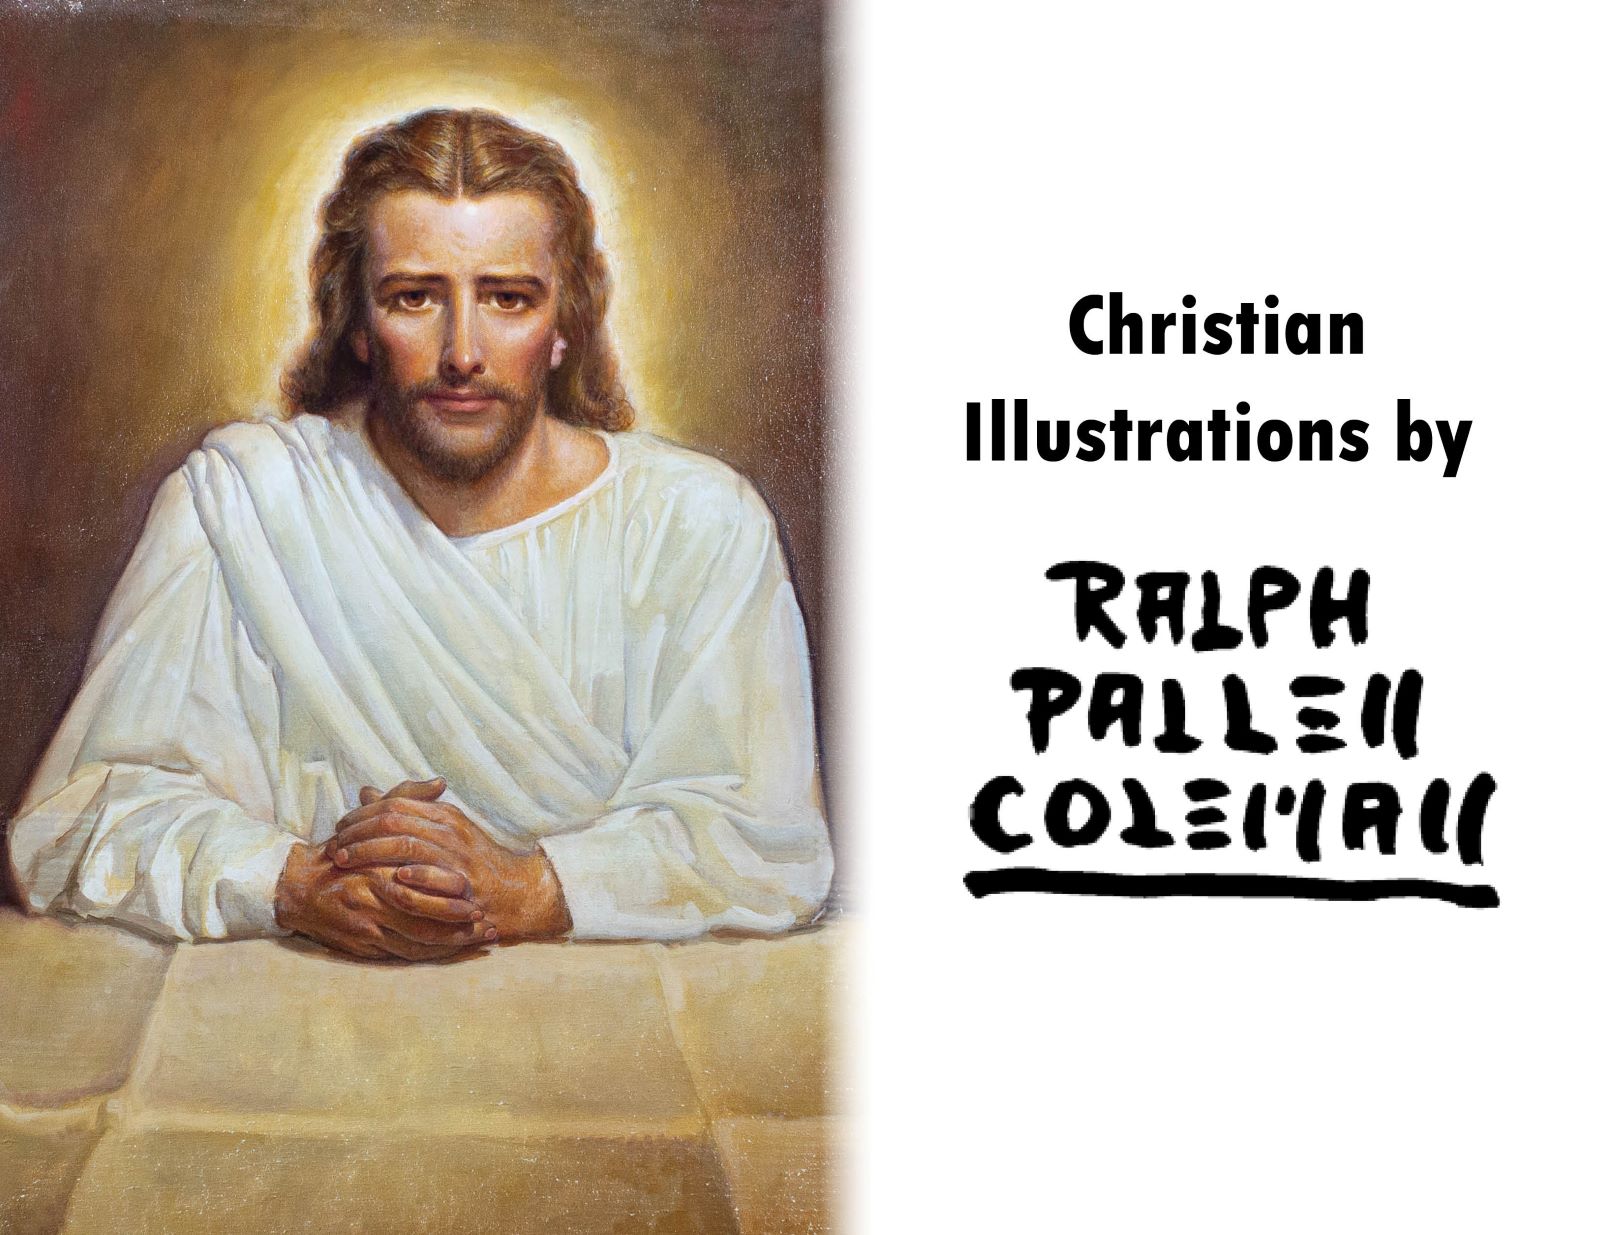 Religious art book with Christian Illustrations and artwork by Ralph Pallen Coleman